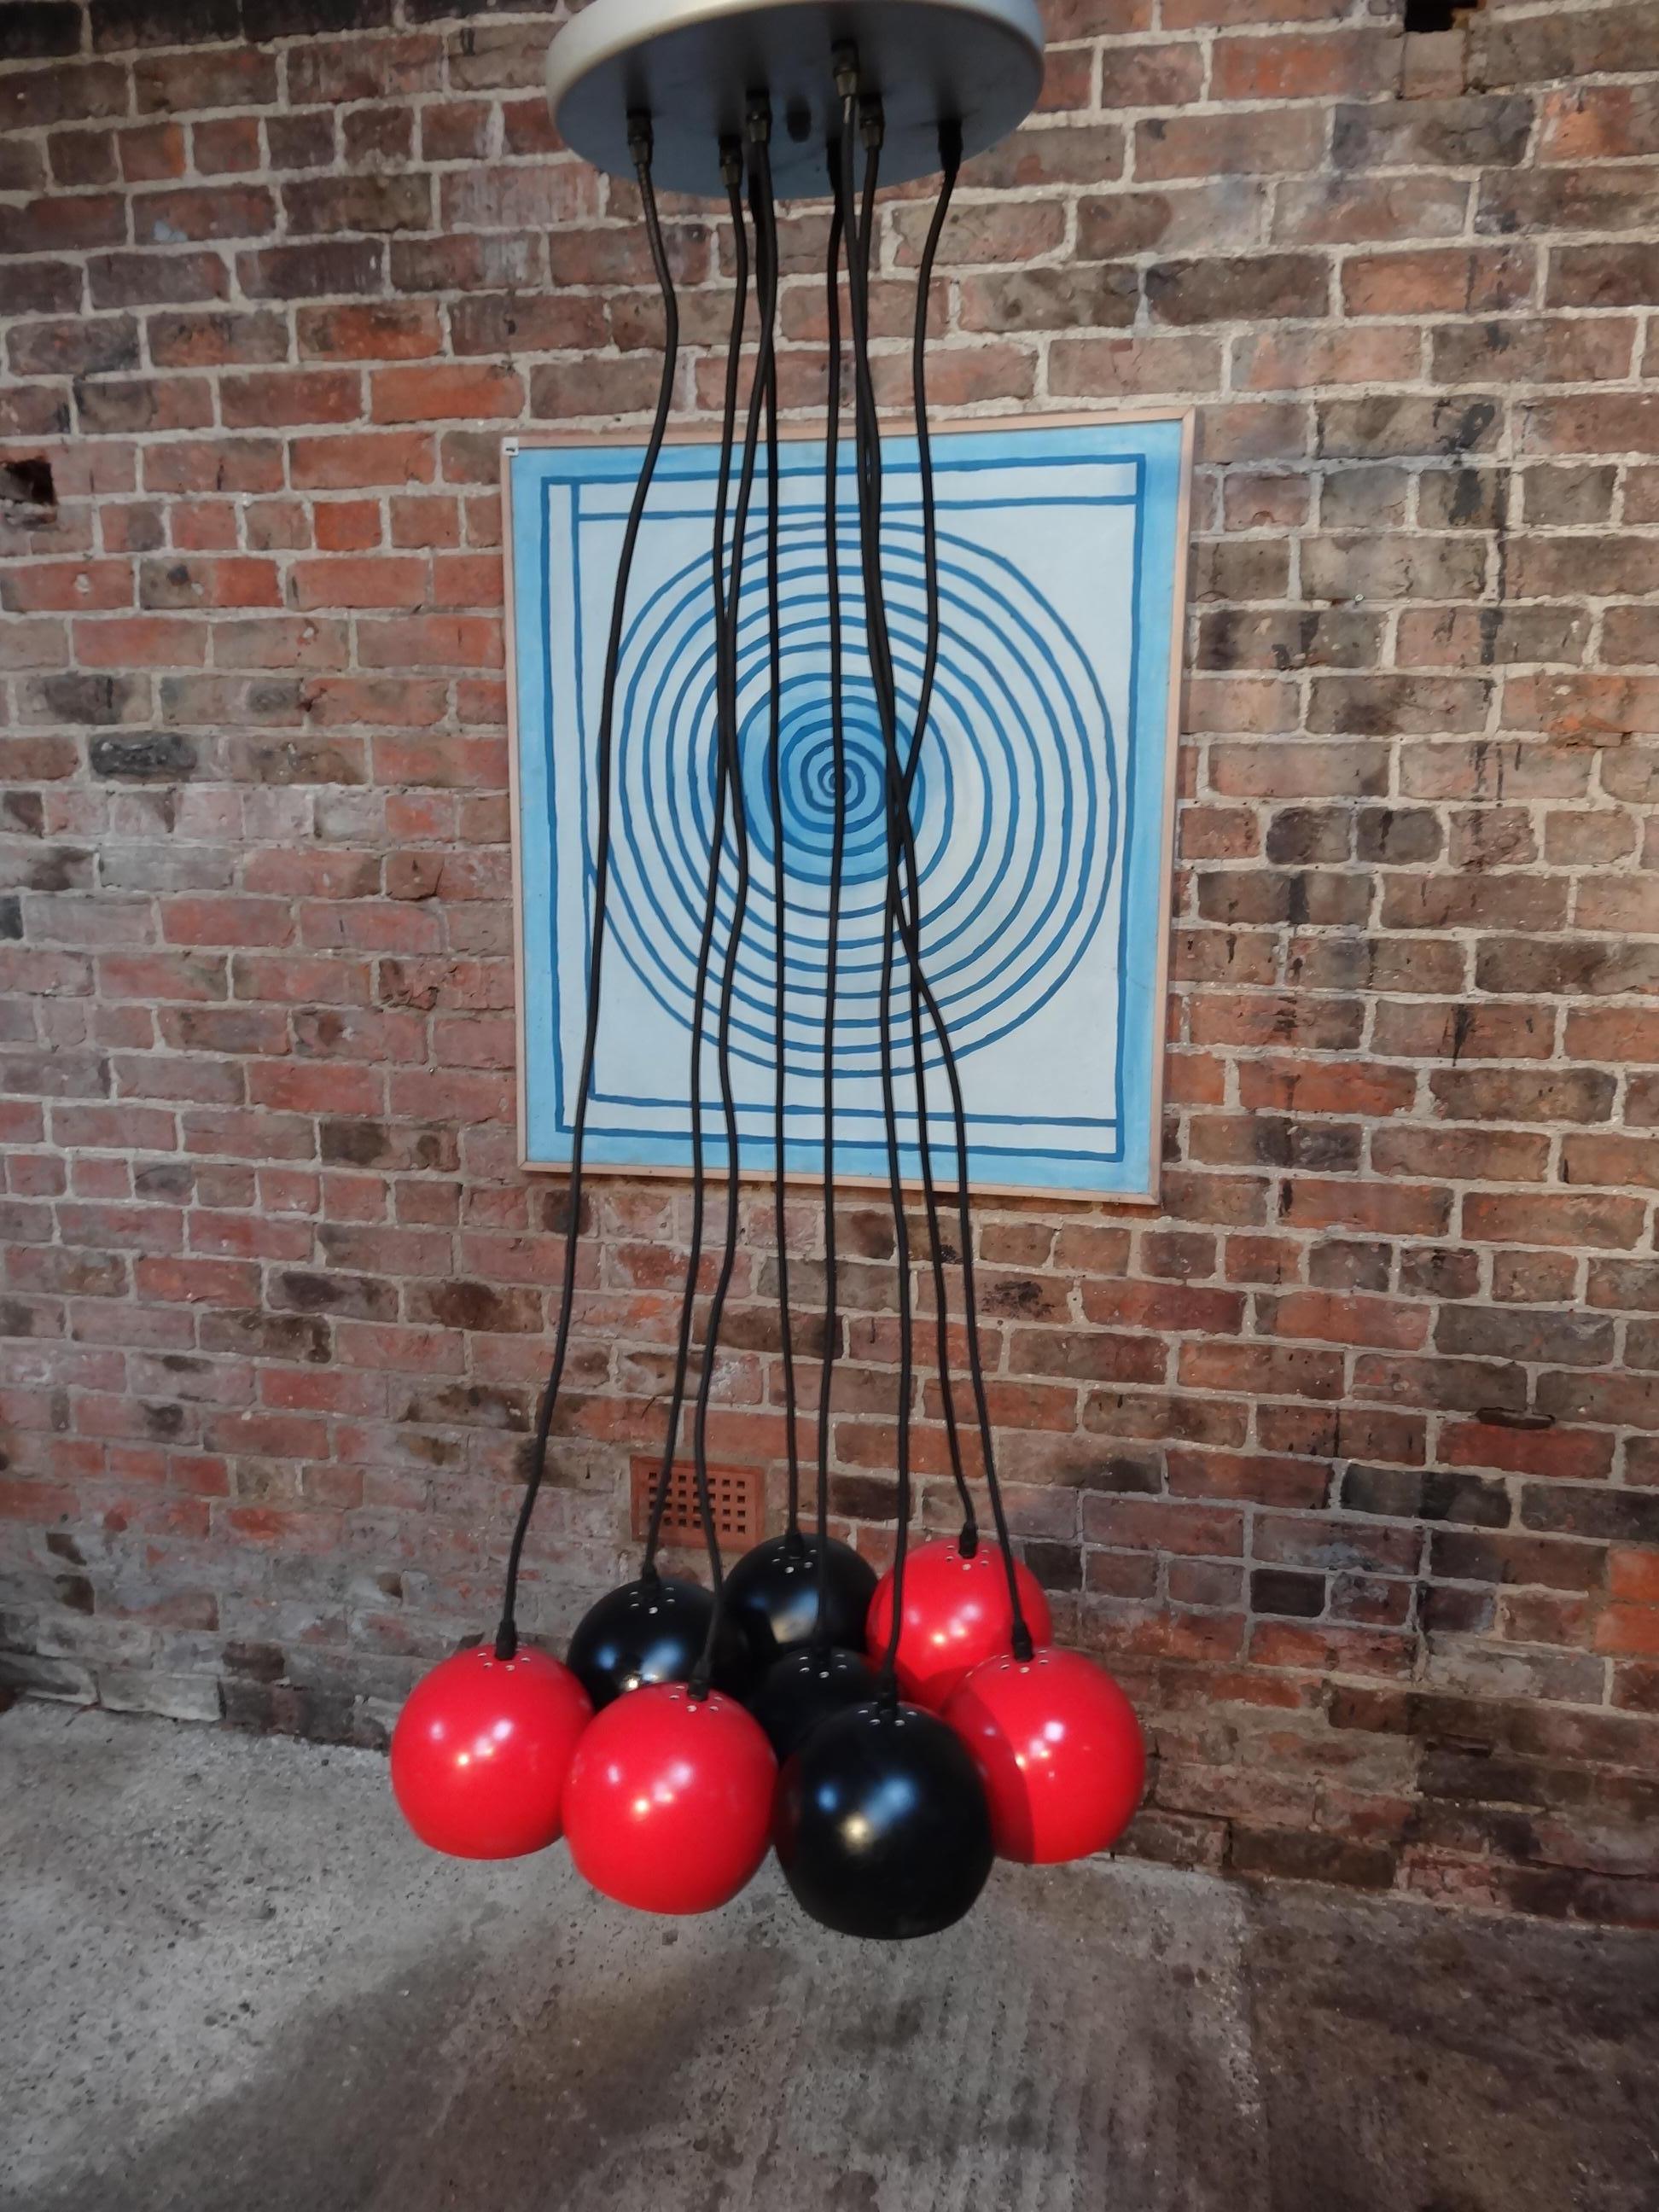 Vintage 1970 super retro metal 8 ball black and red ceiling light, each light can be hanging from the ceiling on a different level and distance from the center to make a great light effect. 

Measures: Height 120cm, depth 50cm, width 50cm.